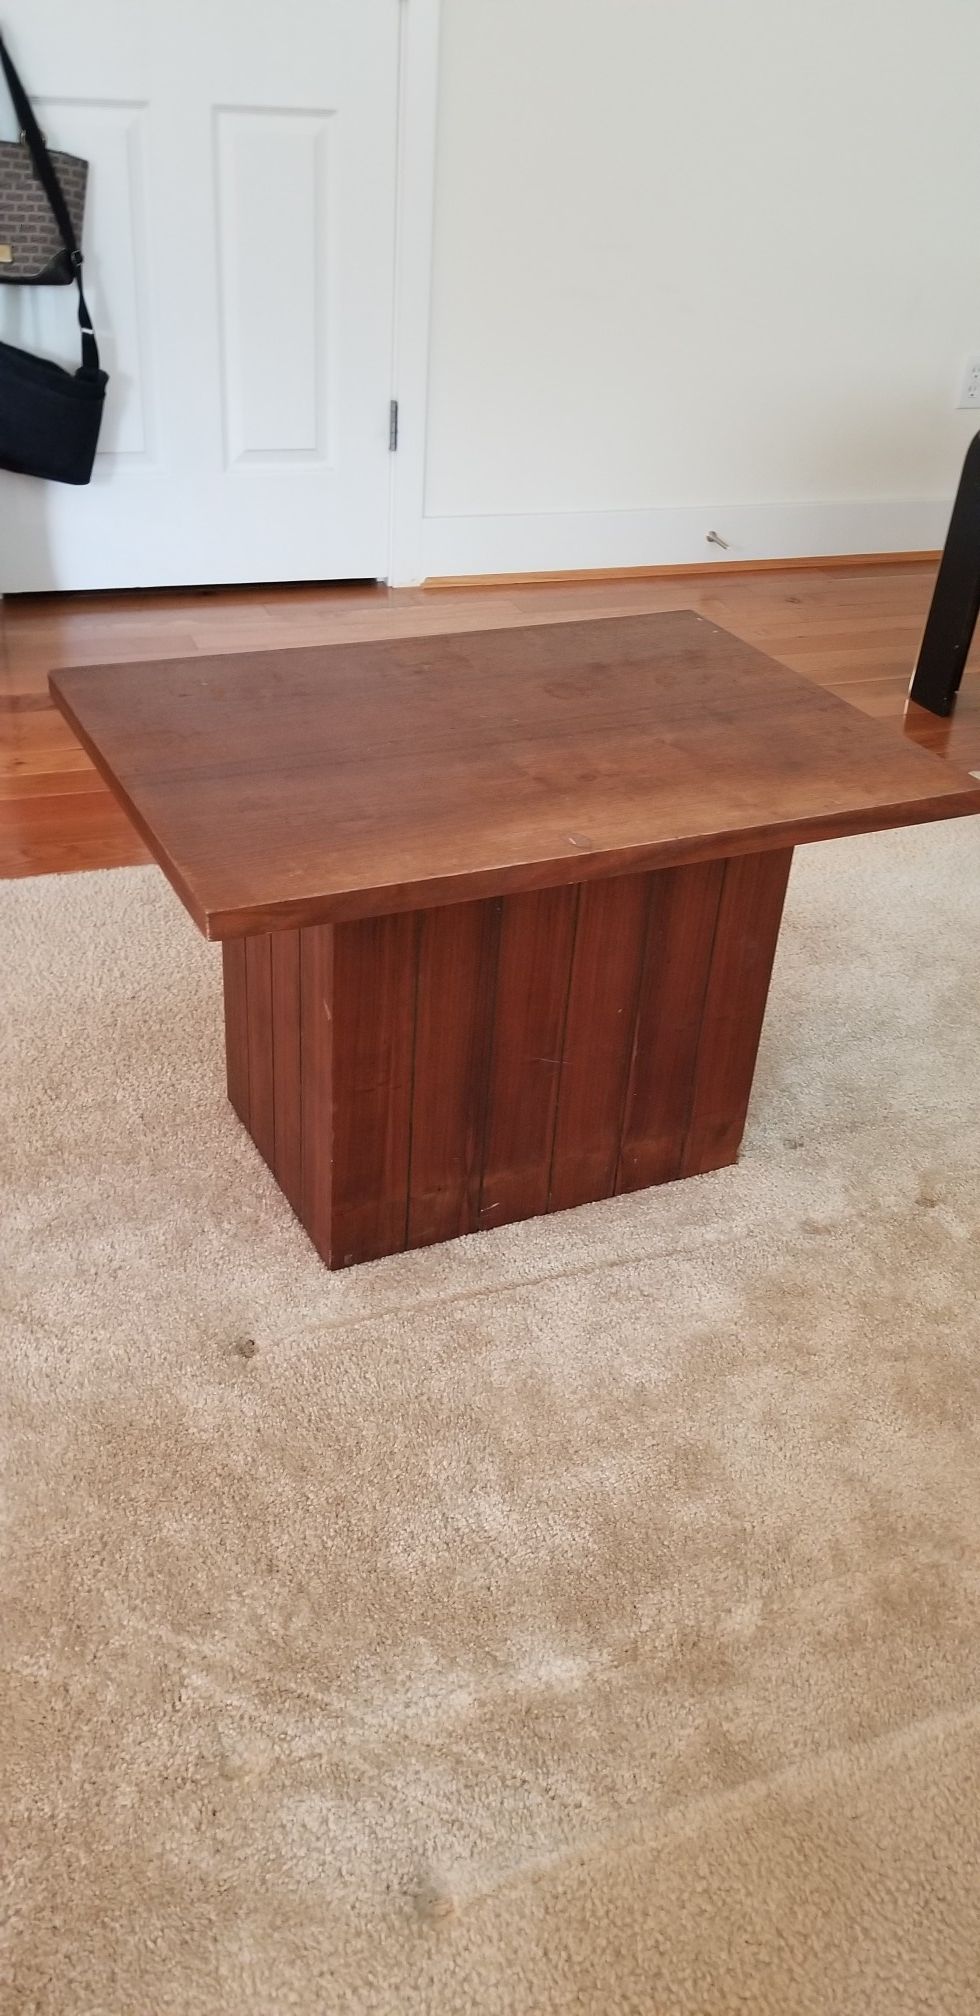 Wooden coffee table *FREE*